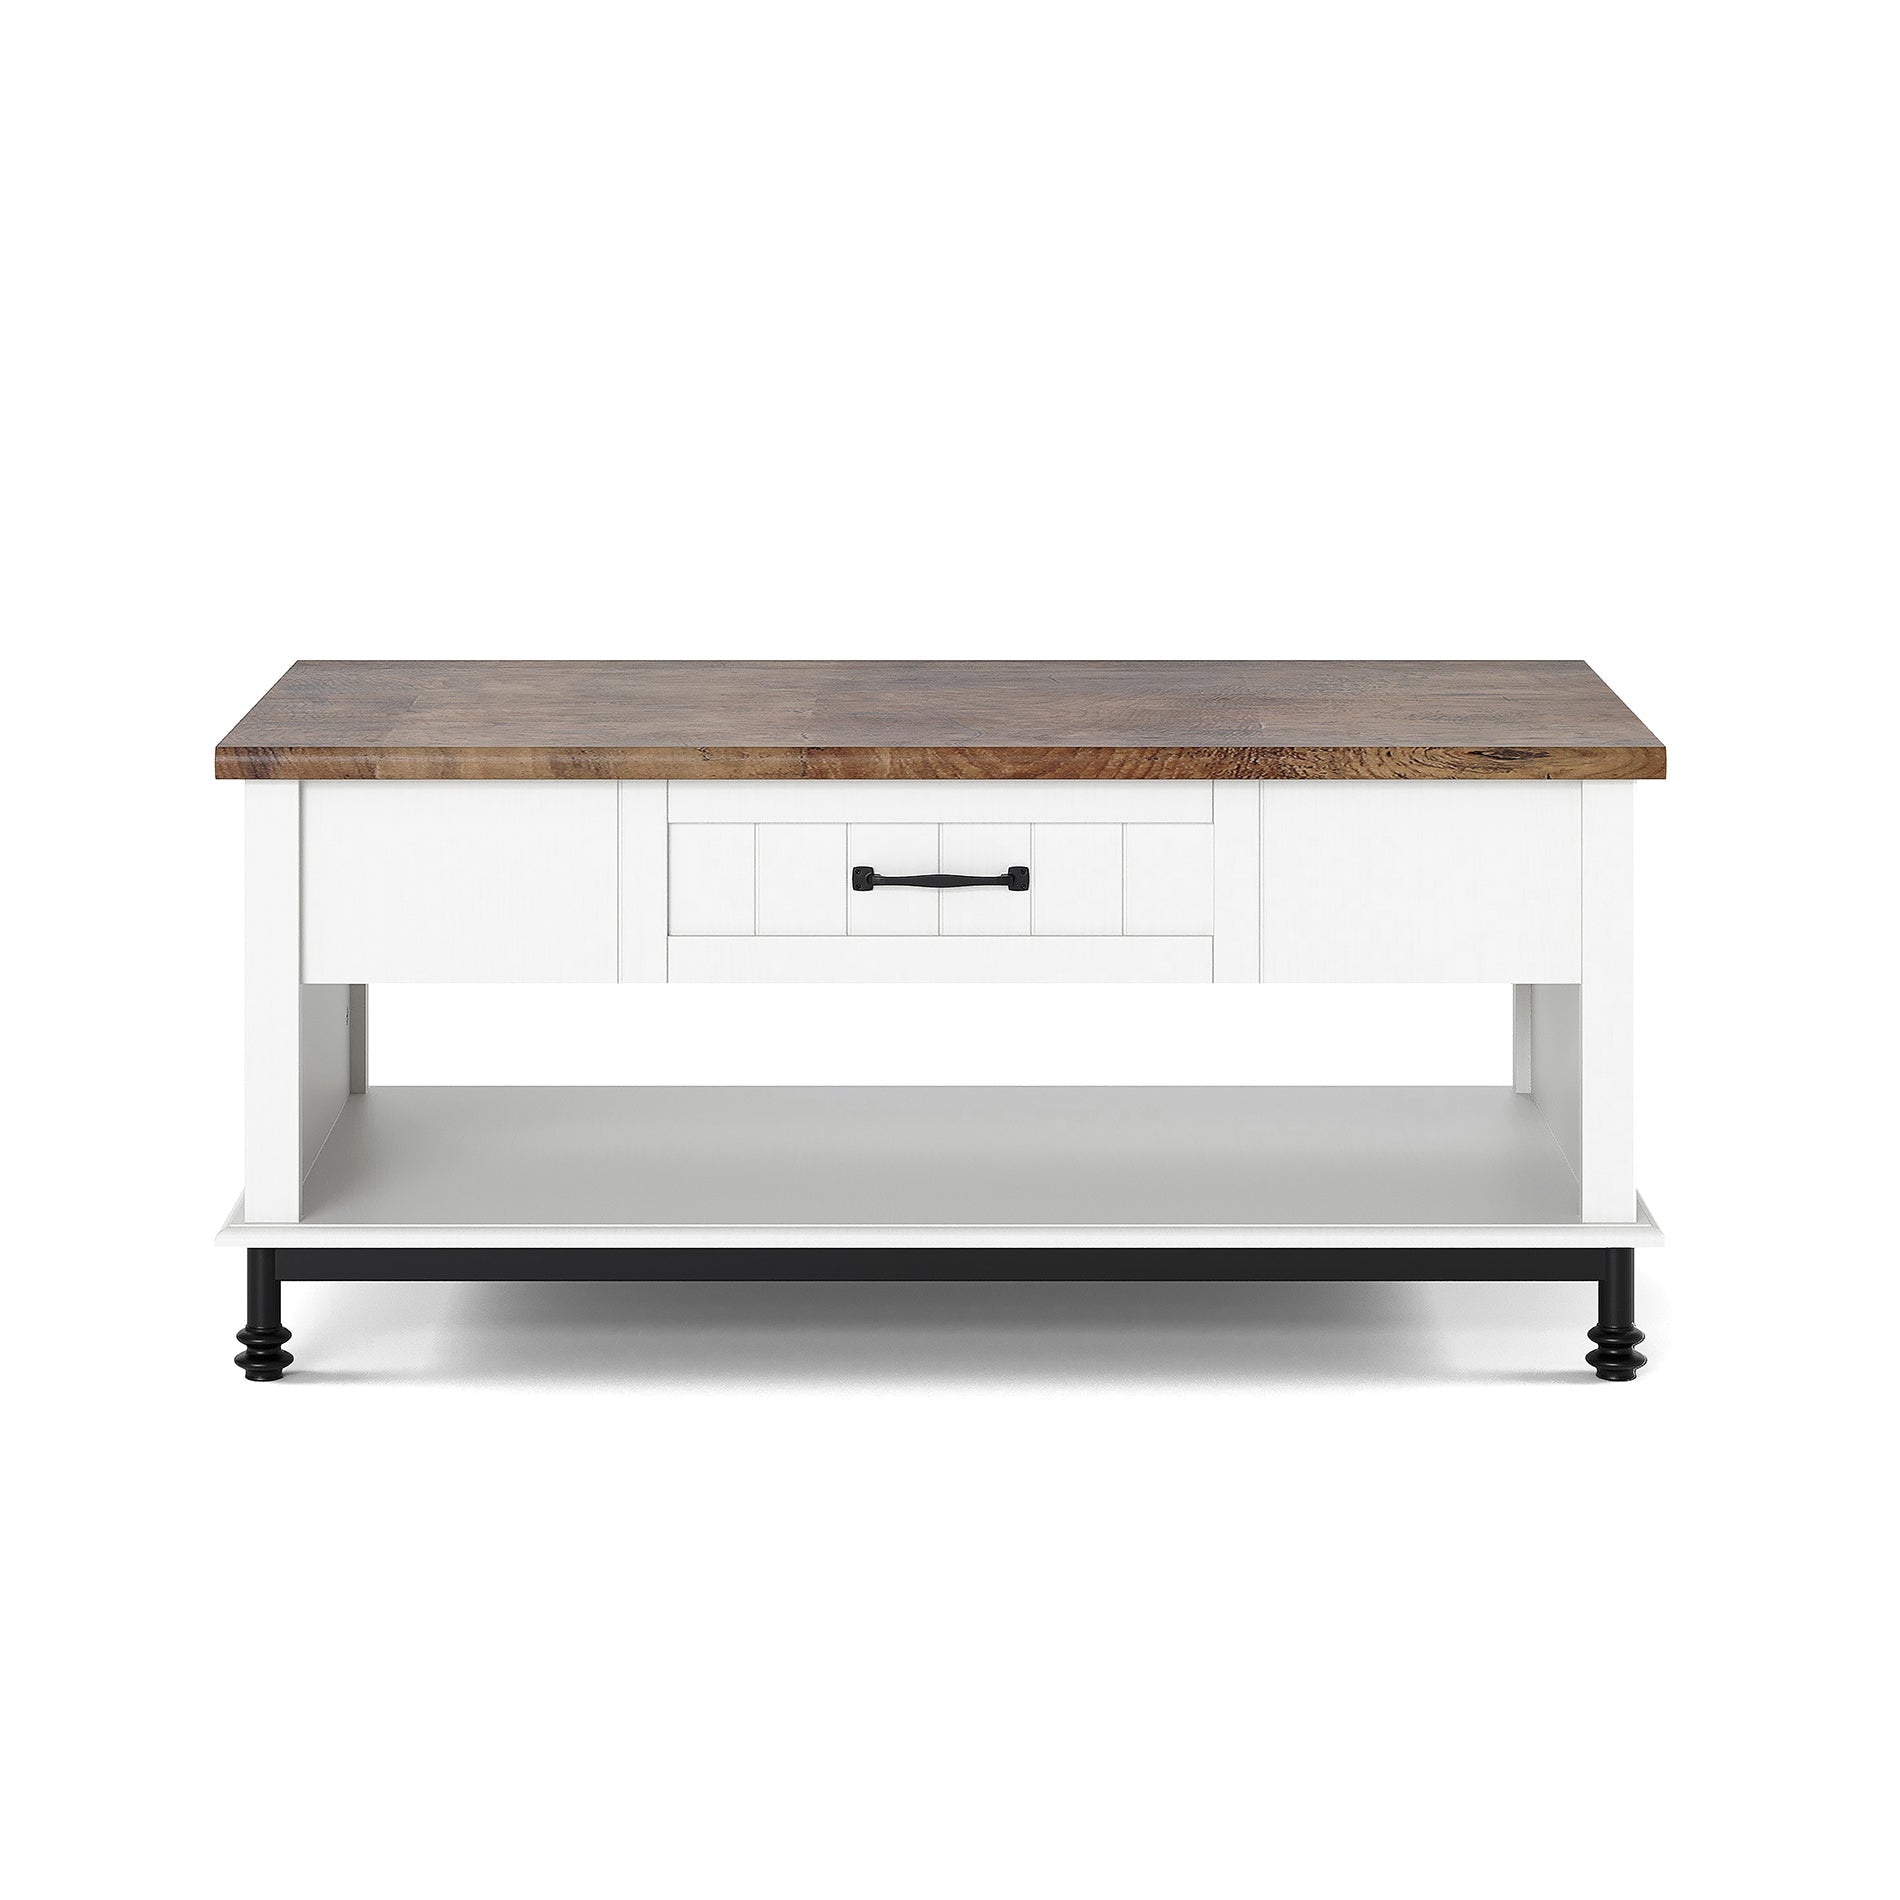 WAMPAT 42" Farmhouse Coffee Table with 1 Drawer & Open Storage Shelf for Living Room, Yellow LED Light, White